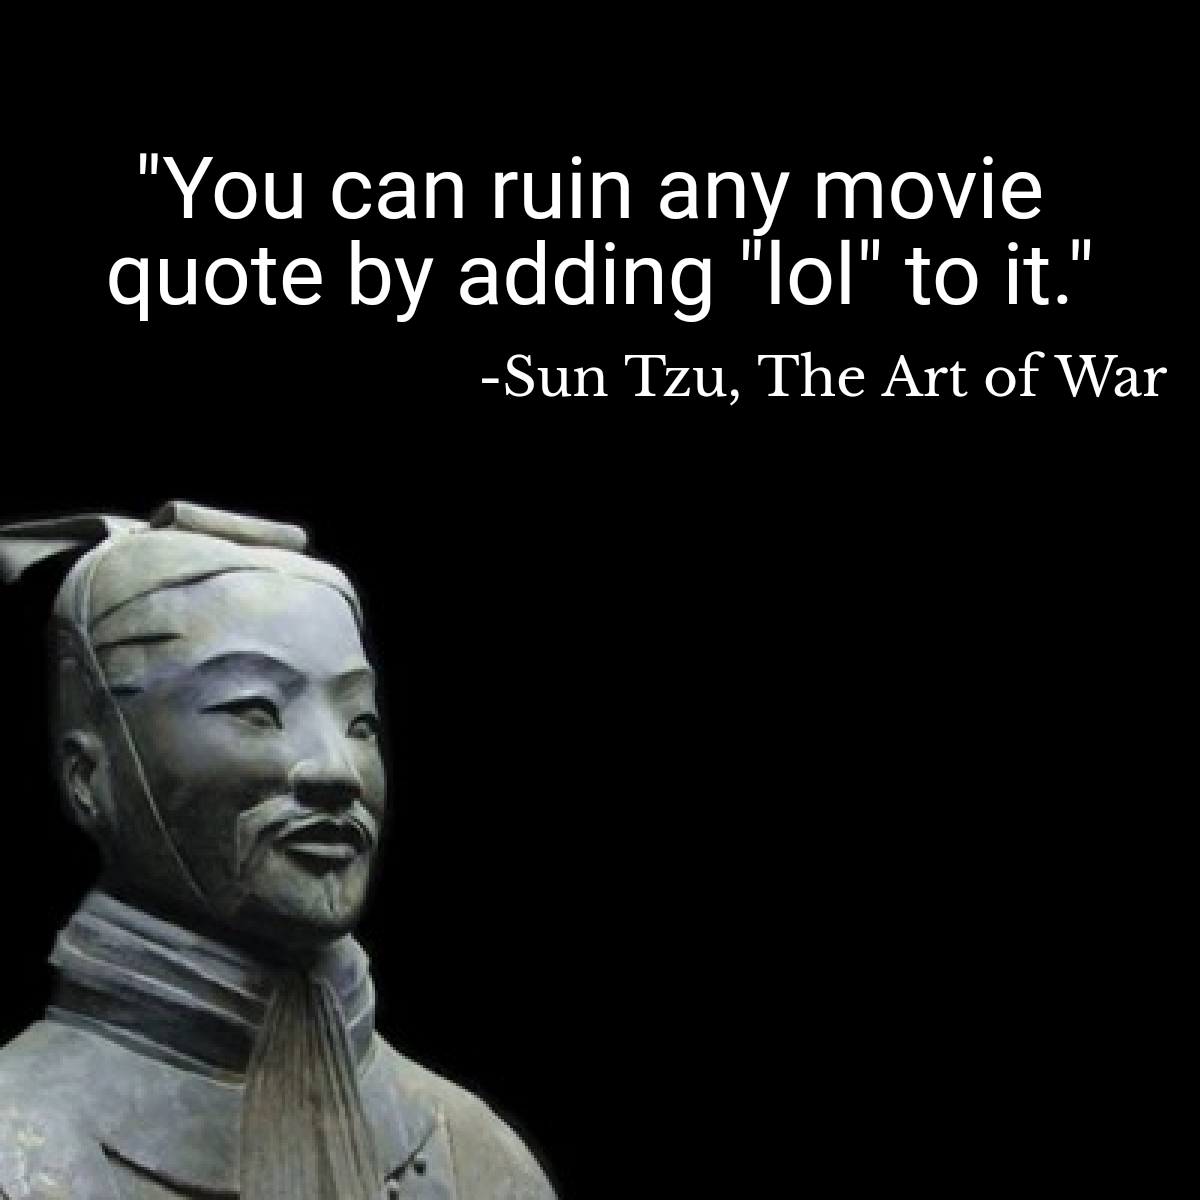 sun tzu art of war - "You can ruin any movie quote by adding "lol" to it." Sun Tzu, The Art of War